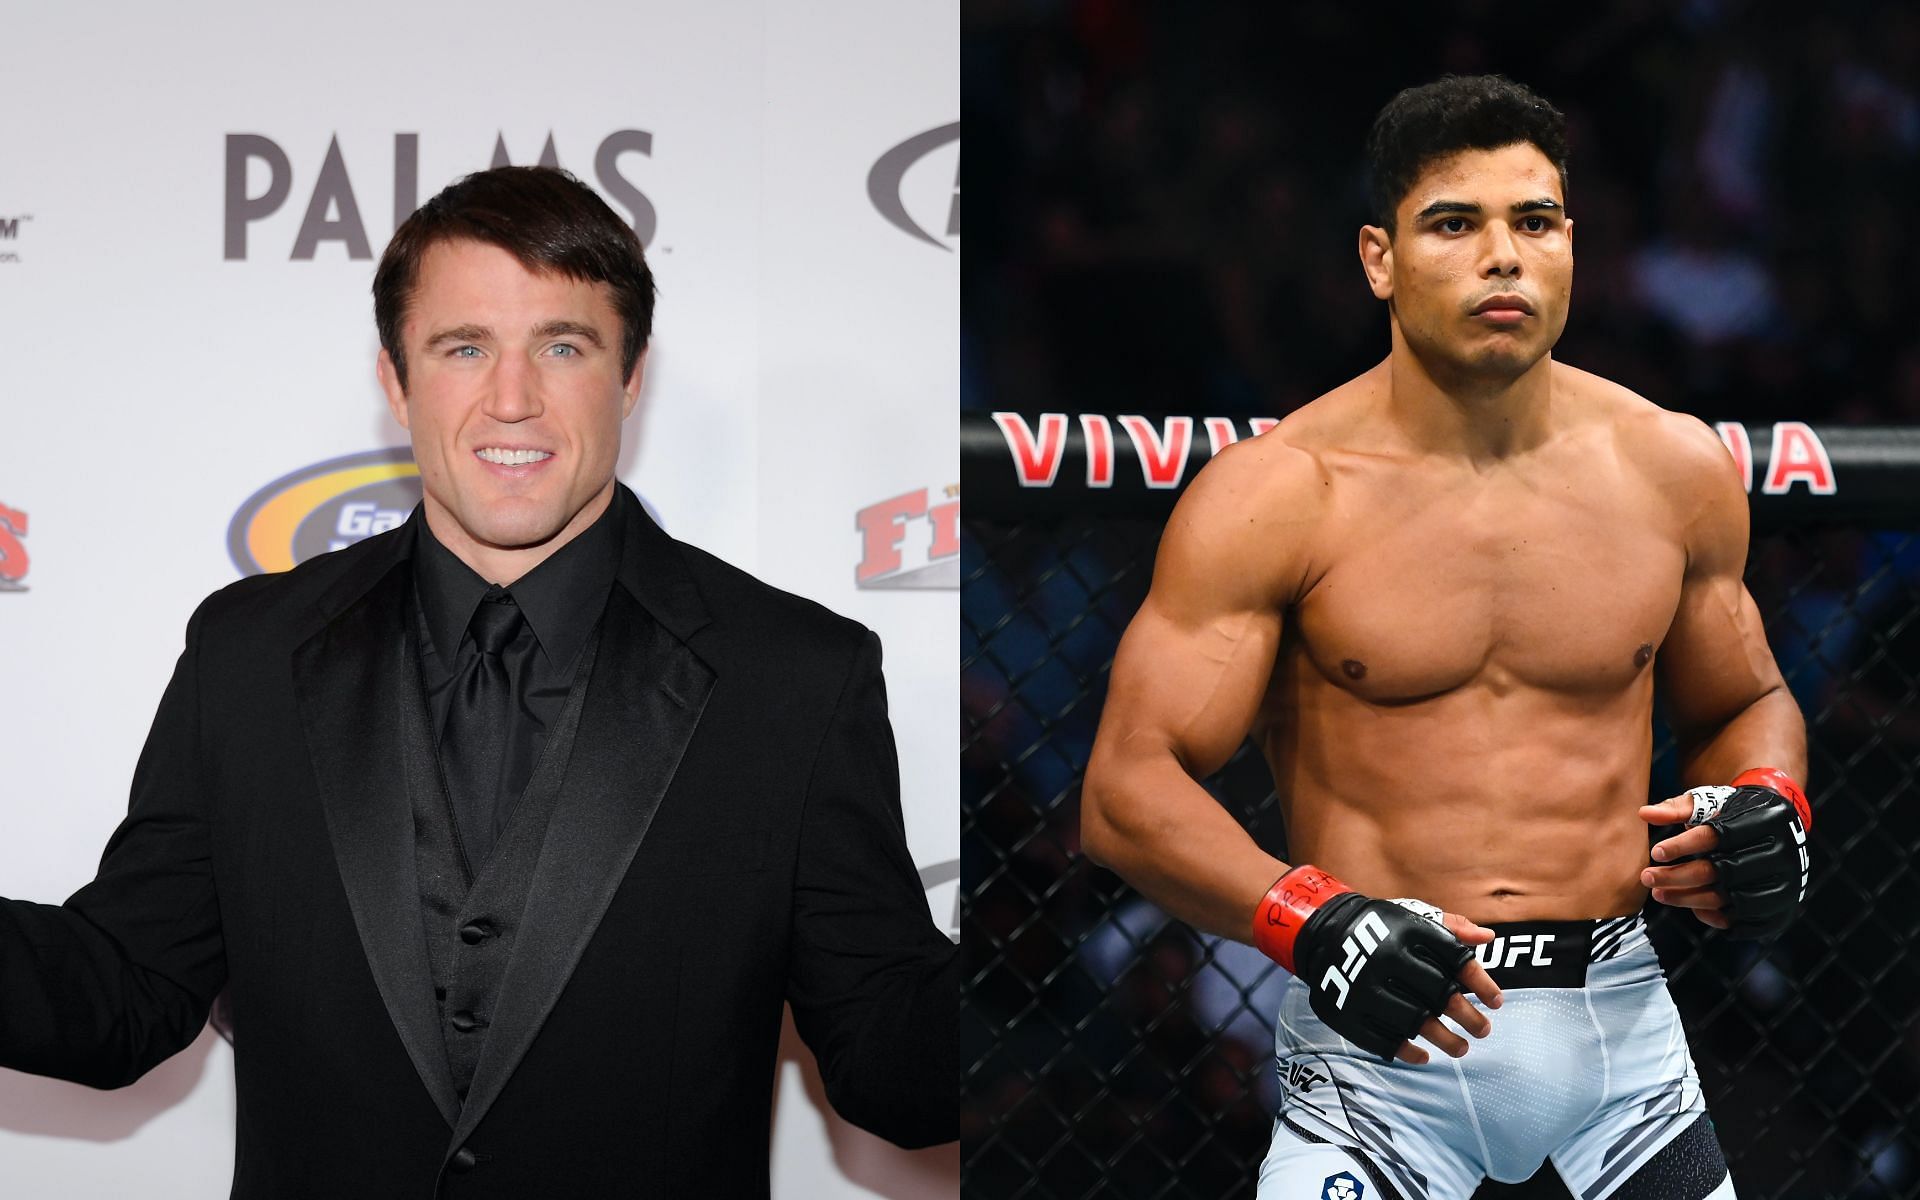 Chael Sonnen (left) and Paulo Costa (right) [Image courtesy: Getty Images]